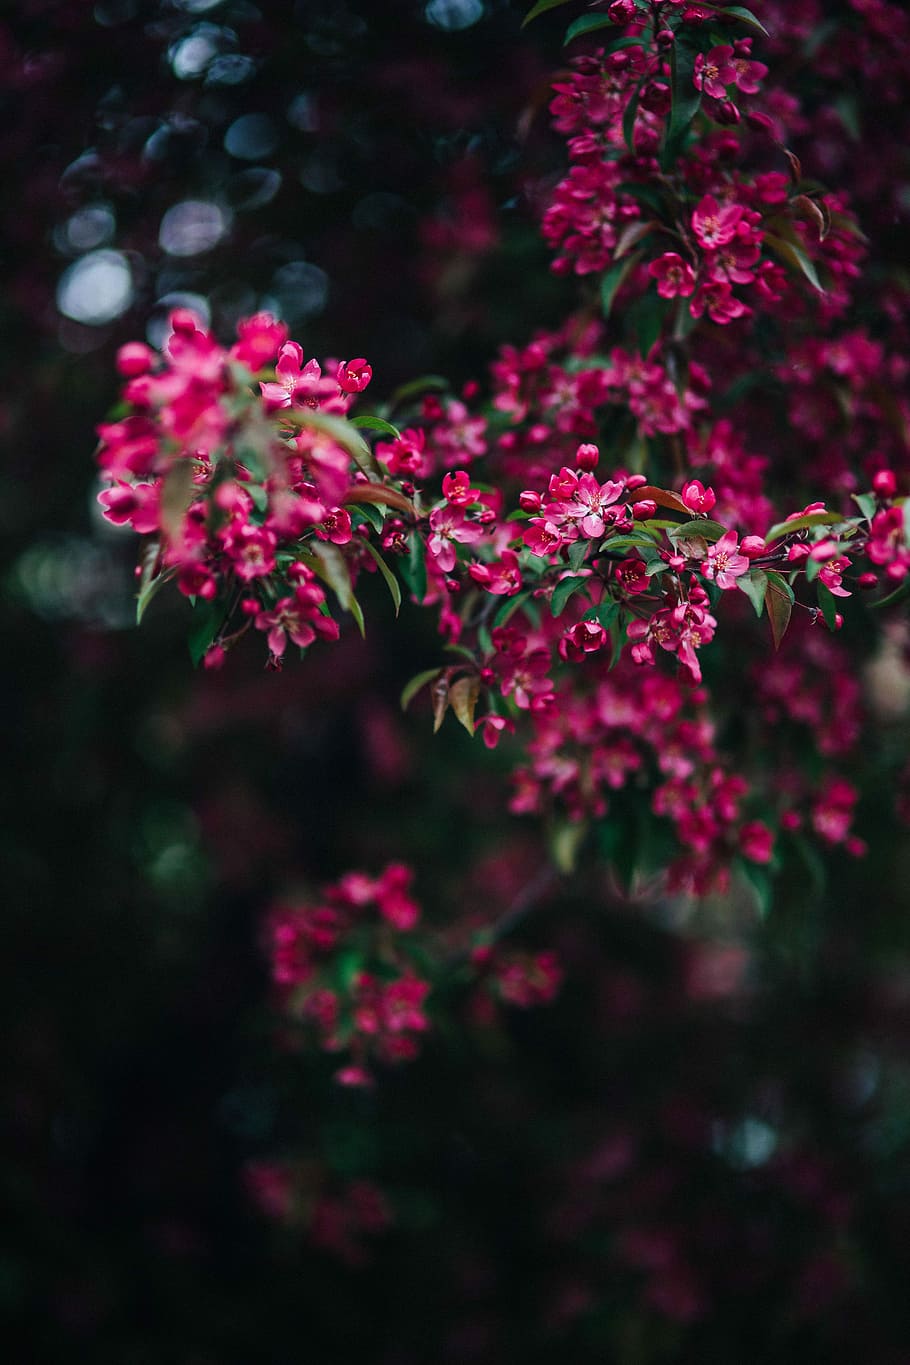 Hd Wallpaper Lovely Pink Flowers Blooming From The Tree Branches Copy Space Wallpaper Flare